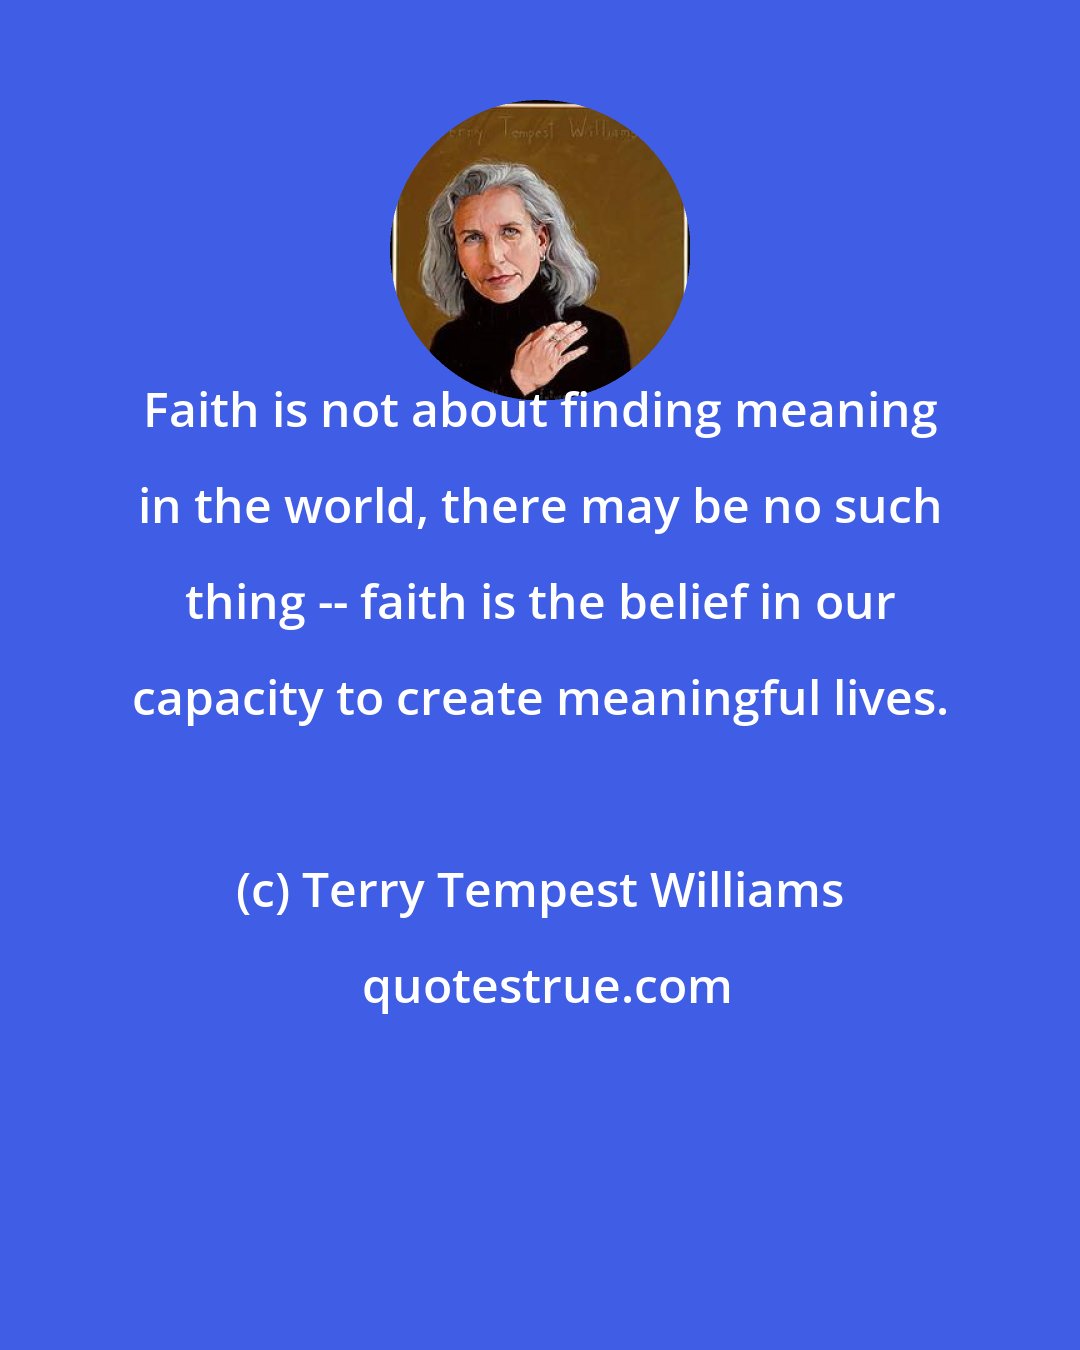 Terry Tempest Williams: Faith is not about finding meaning in the world, there may be no such thing -- faith is the belief in our capacity to create meaningful lives.